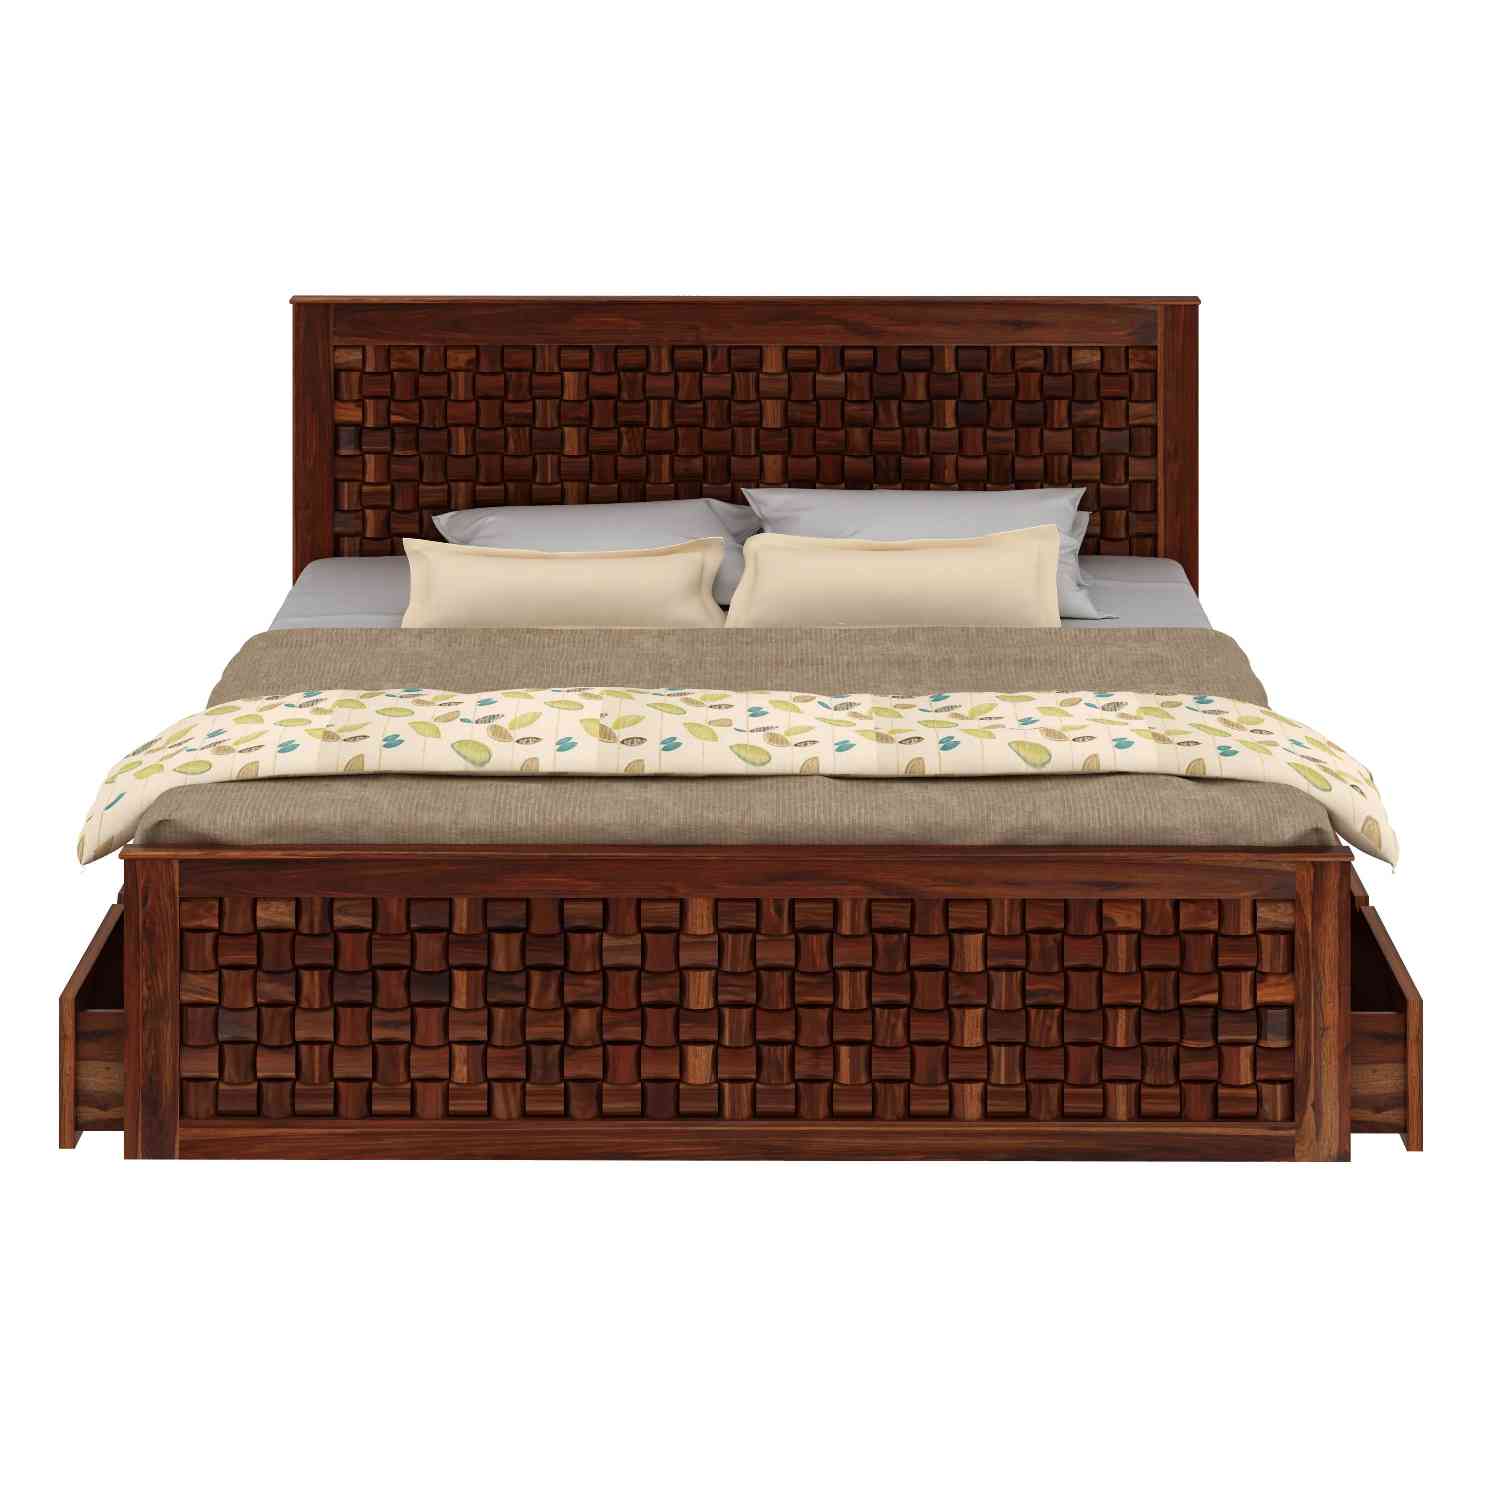 Olivia Solid Sheesham Wood Bed With Four Drawers (Queen Size, Natural Finish)